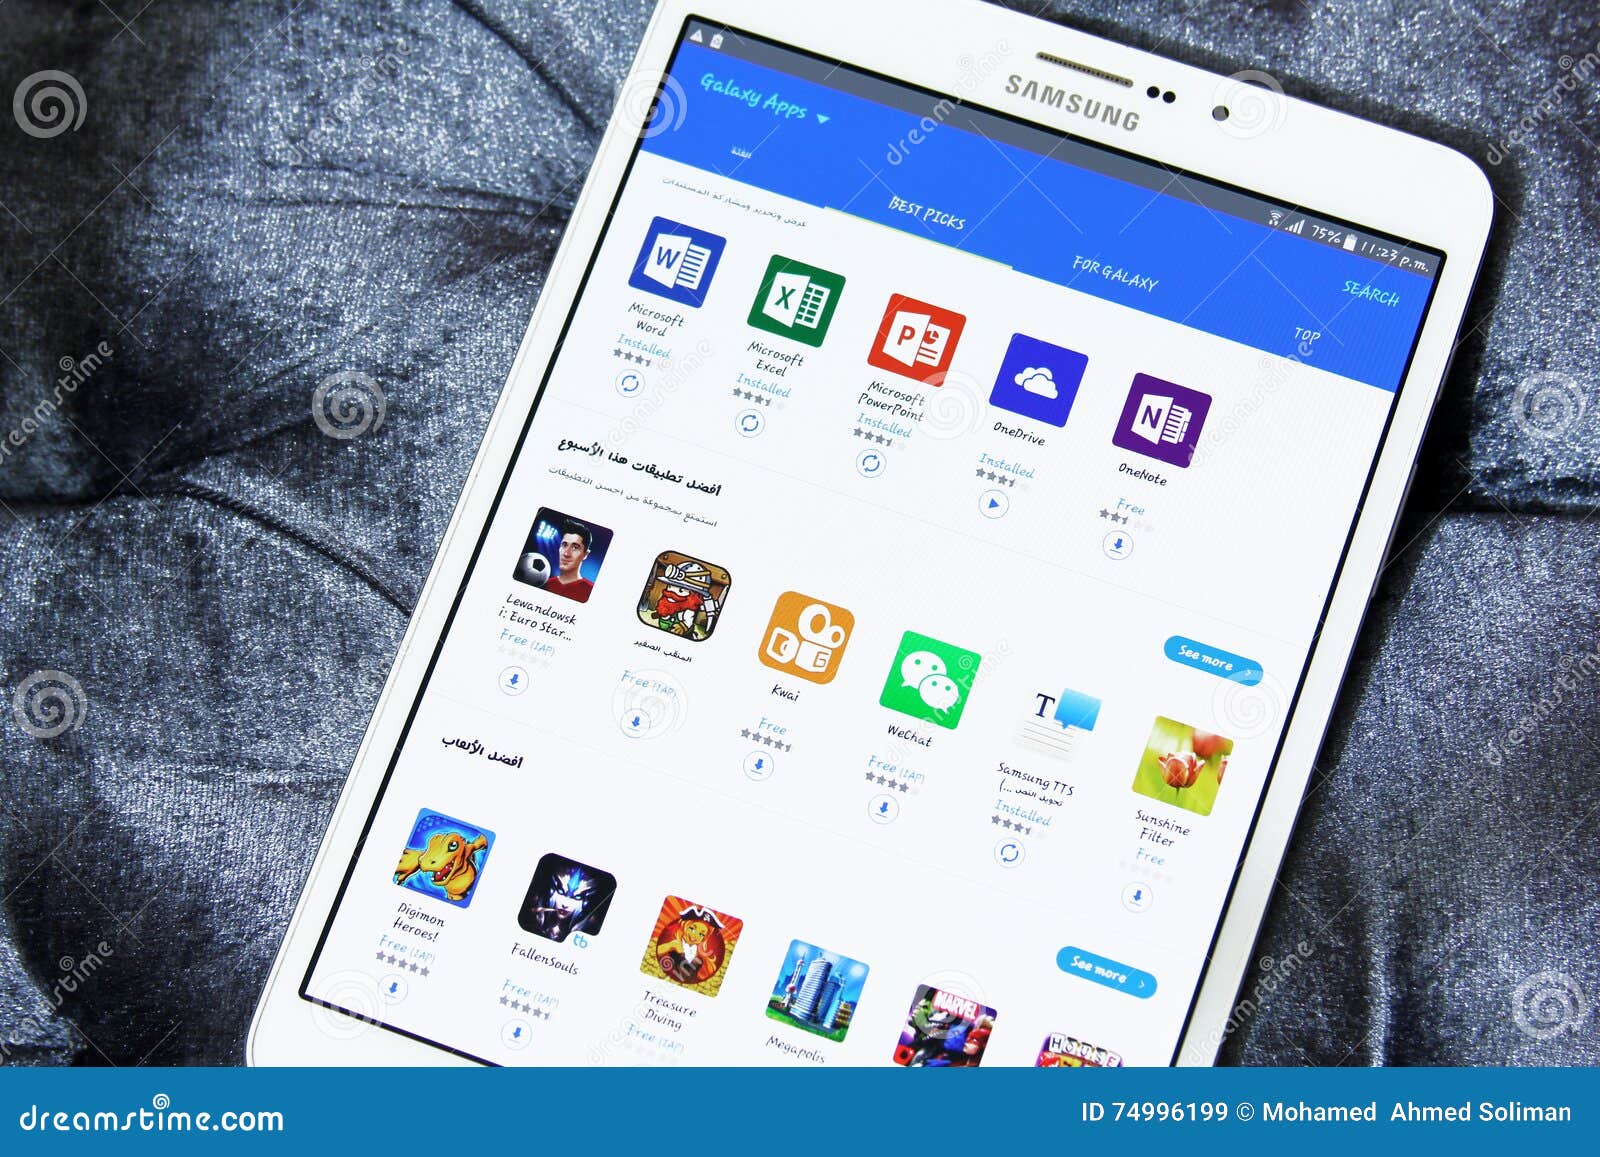 Android Galaxy Apps Store On Samsung Tab S2 Editorial Stock Image ...